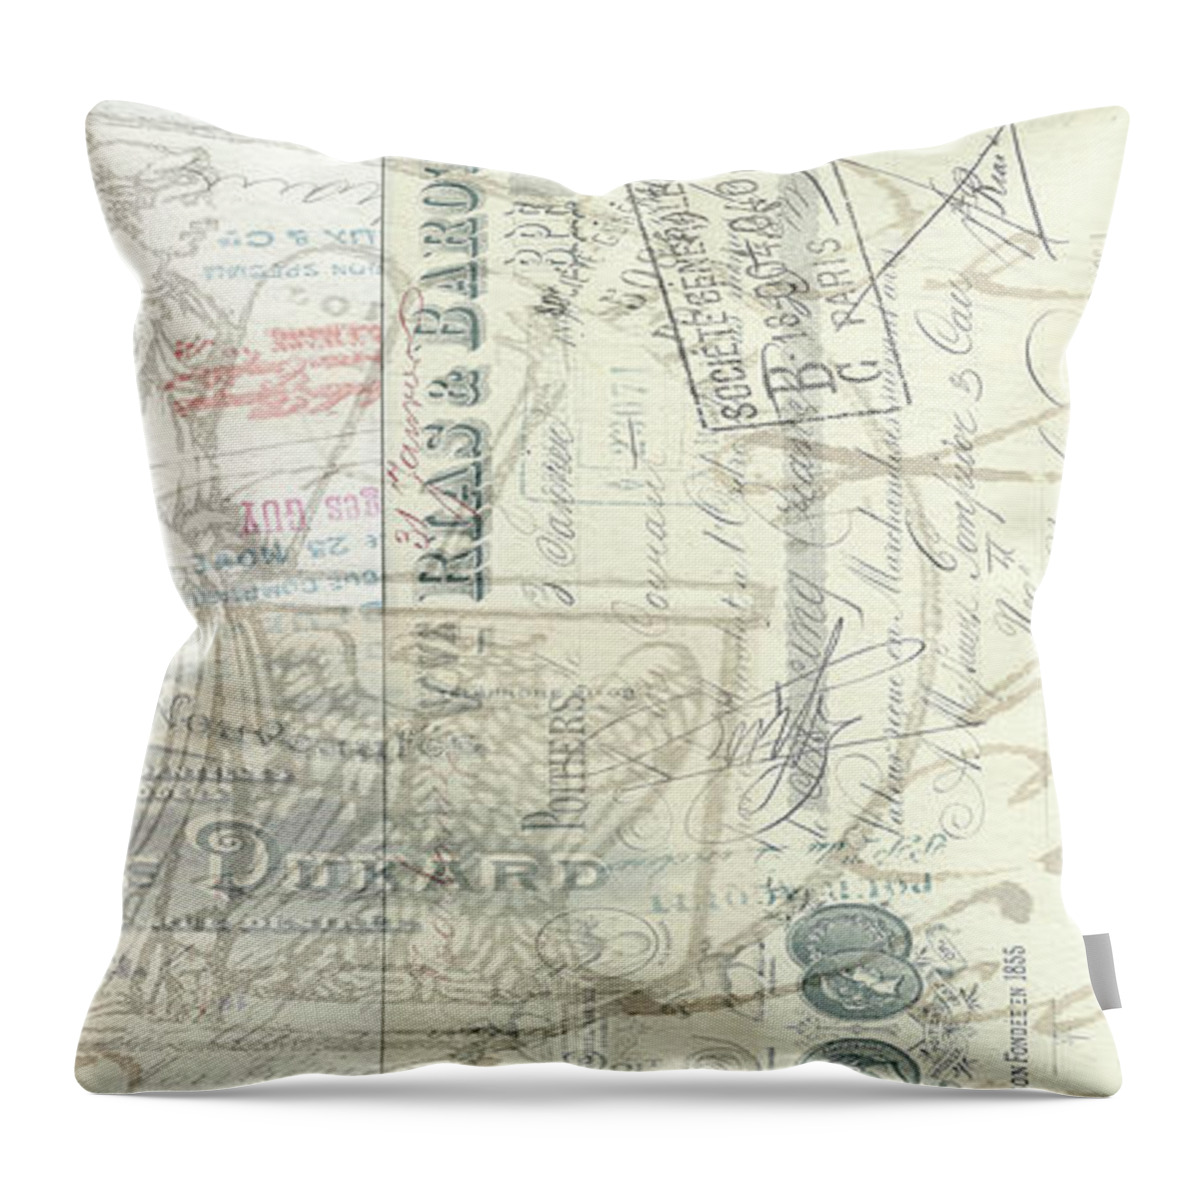 Mug Throw Pillow featuring the photograph French Letters Mug by Edward Fielding